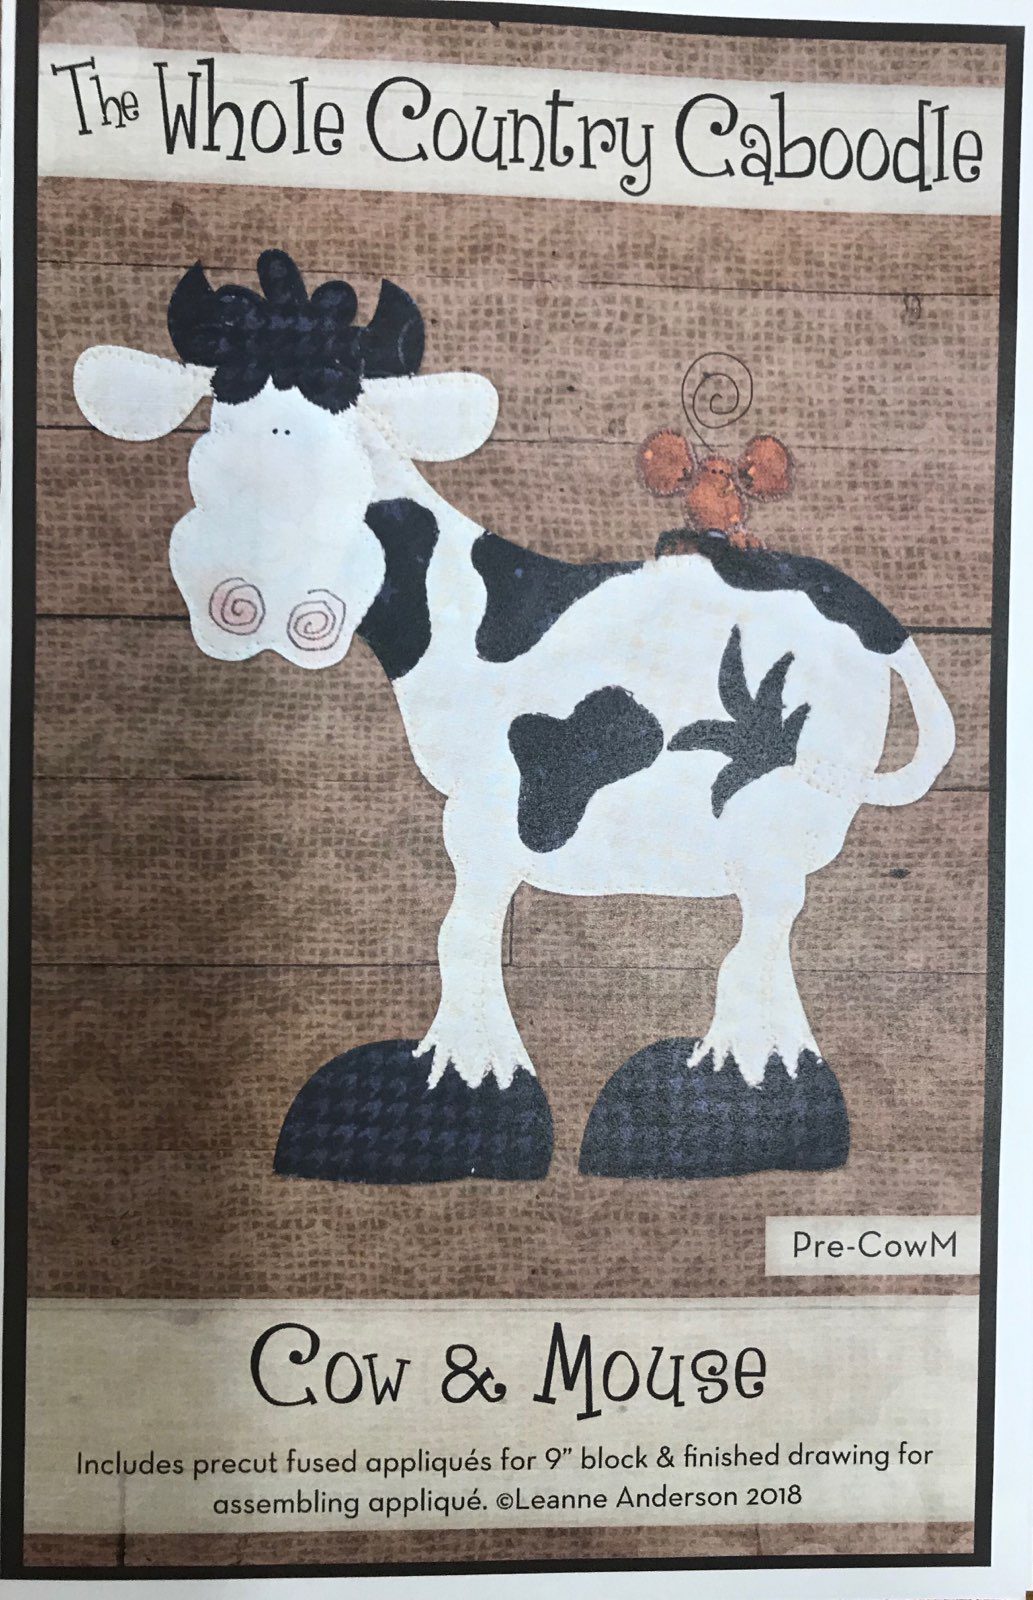 The Whole Country Caboodle - Cow & Mouse Precut Fused Applique